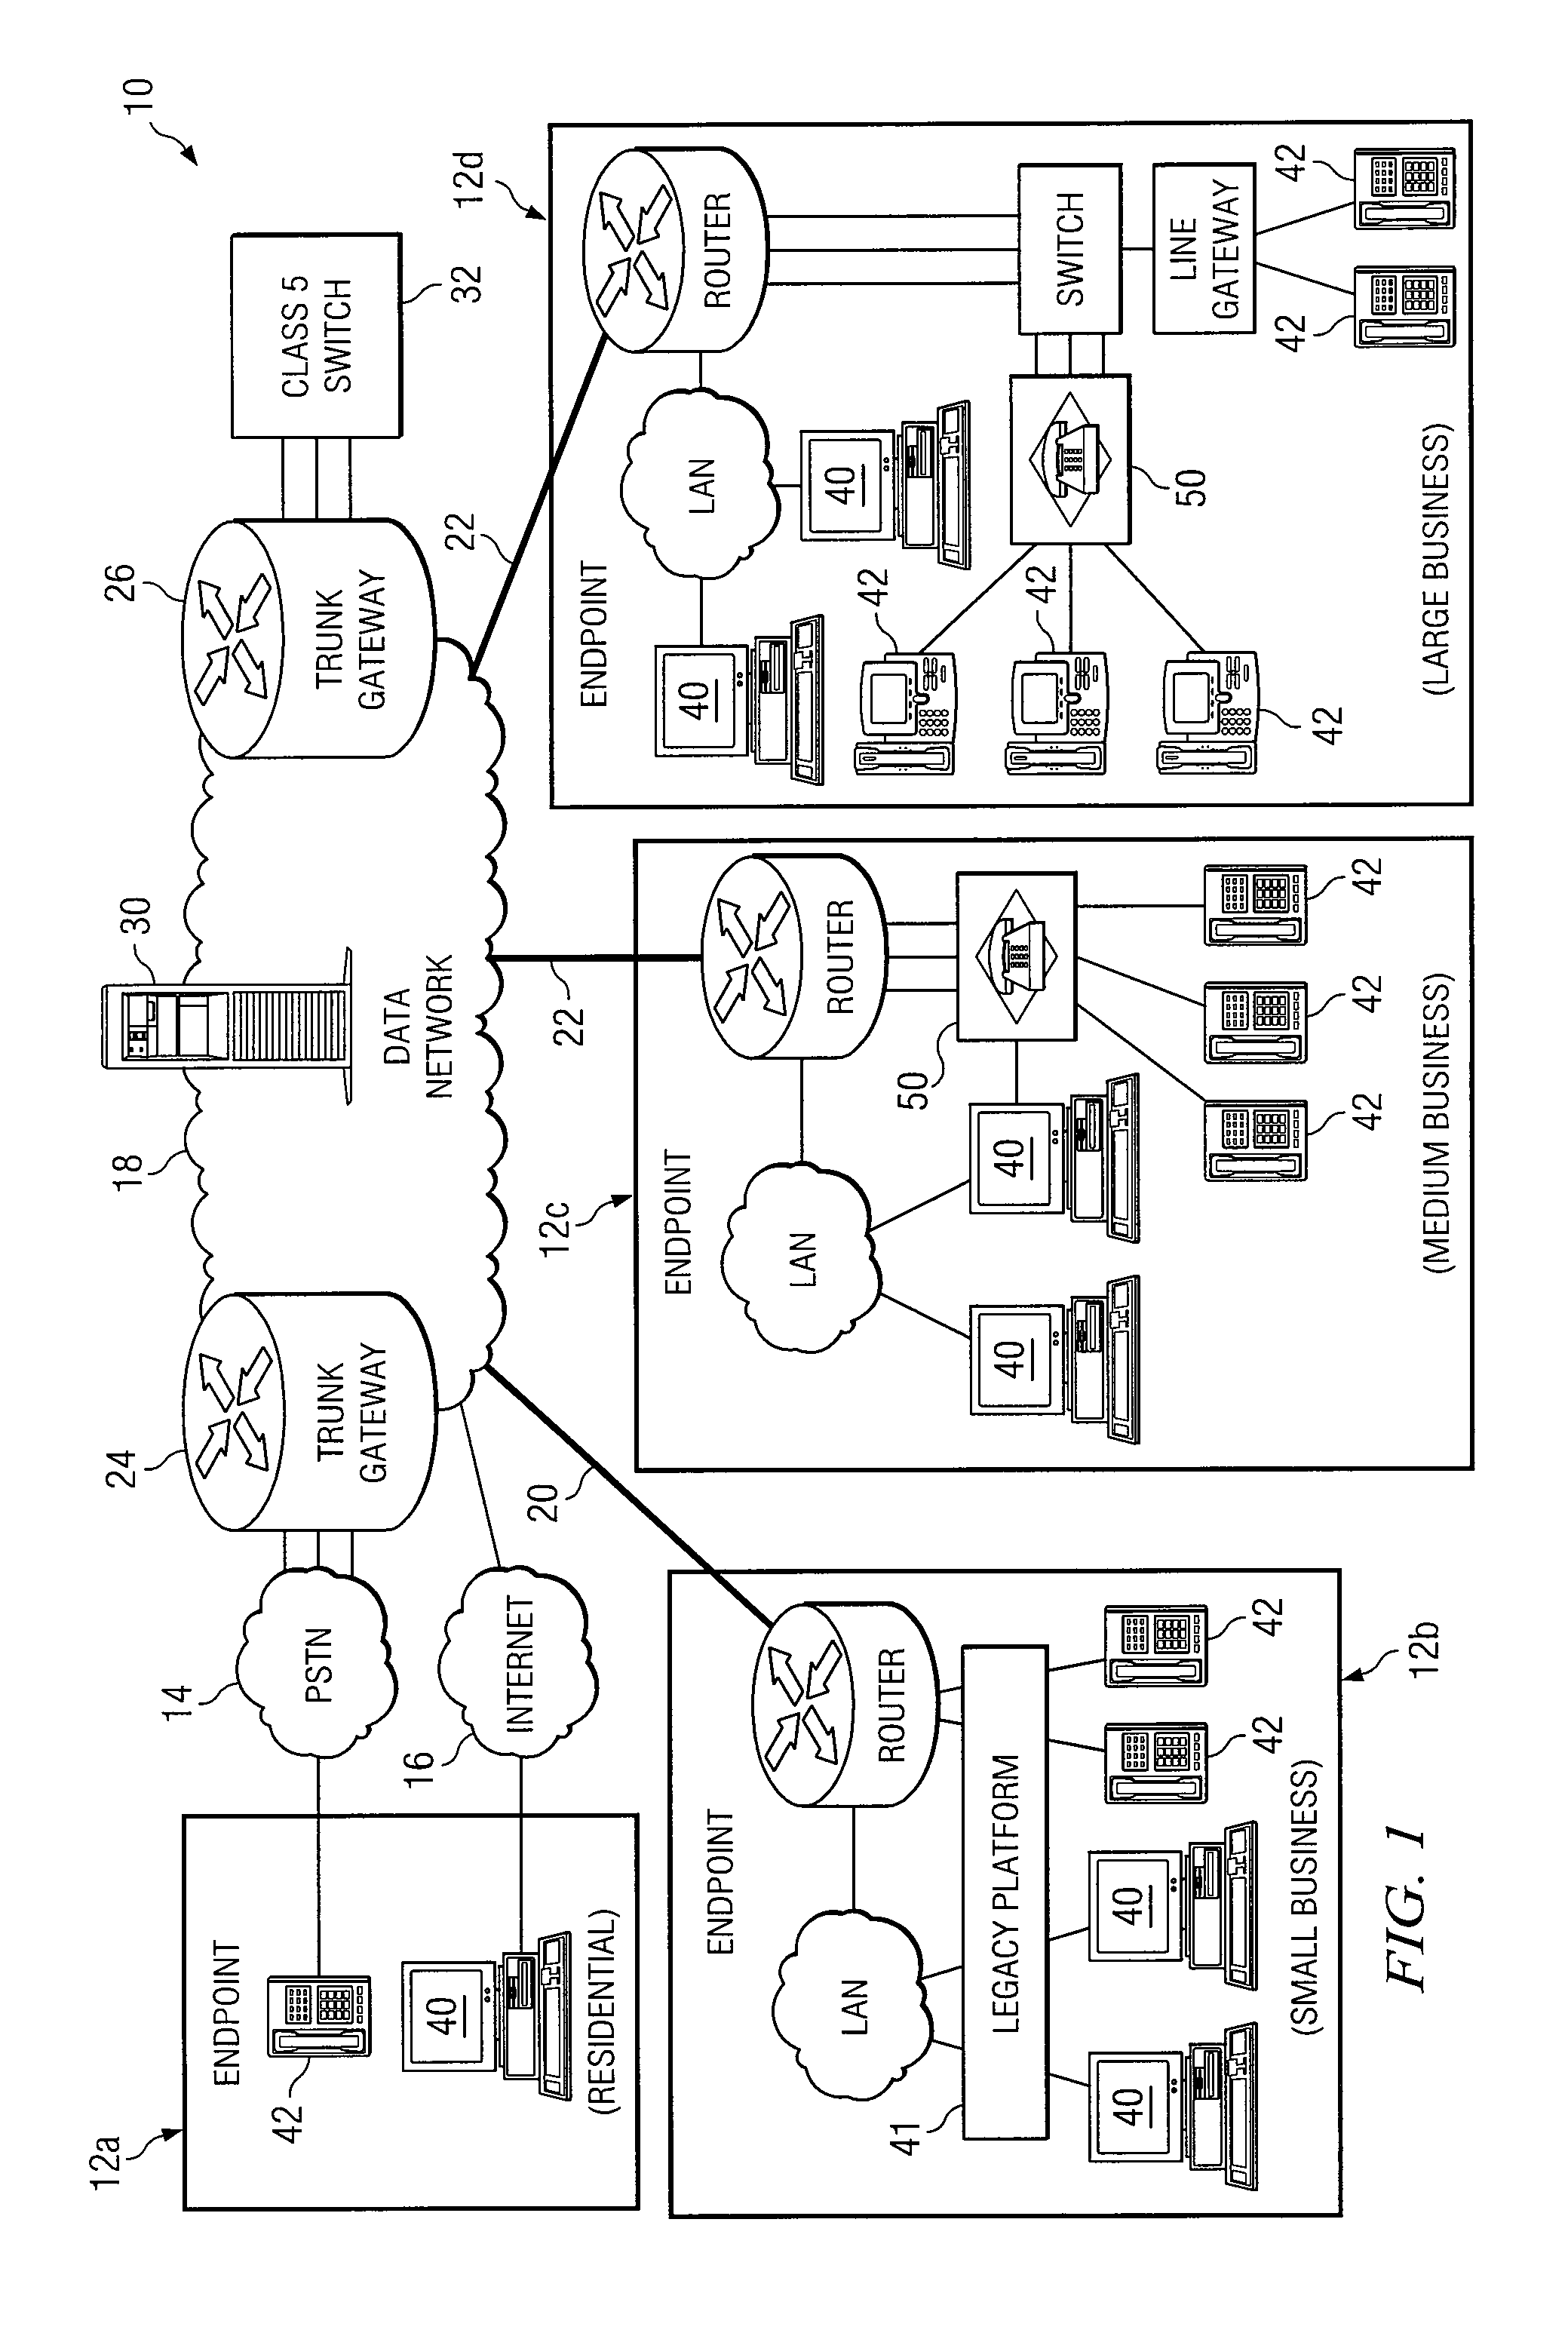 System and method for implementing a session initiation protocol feature